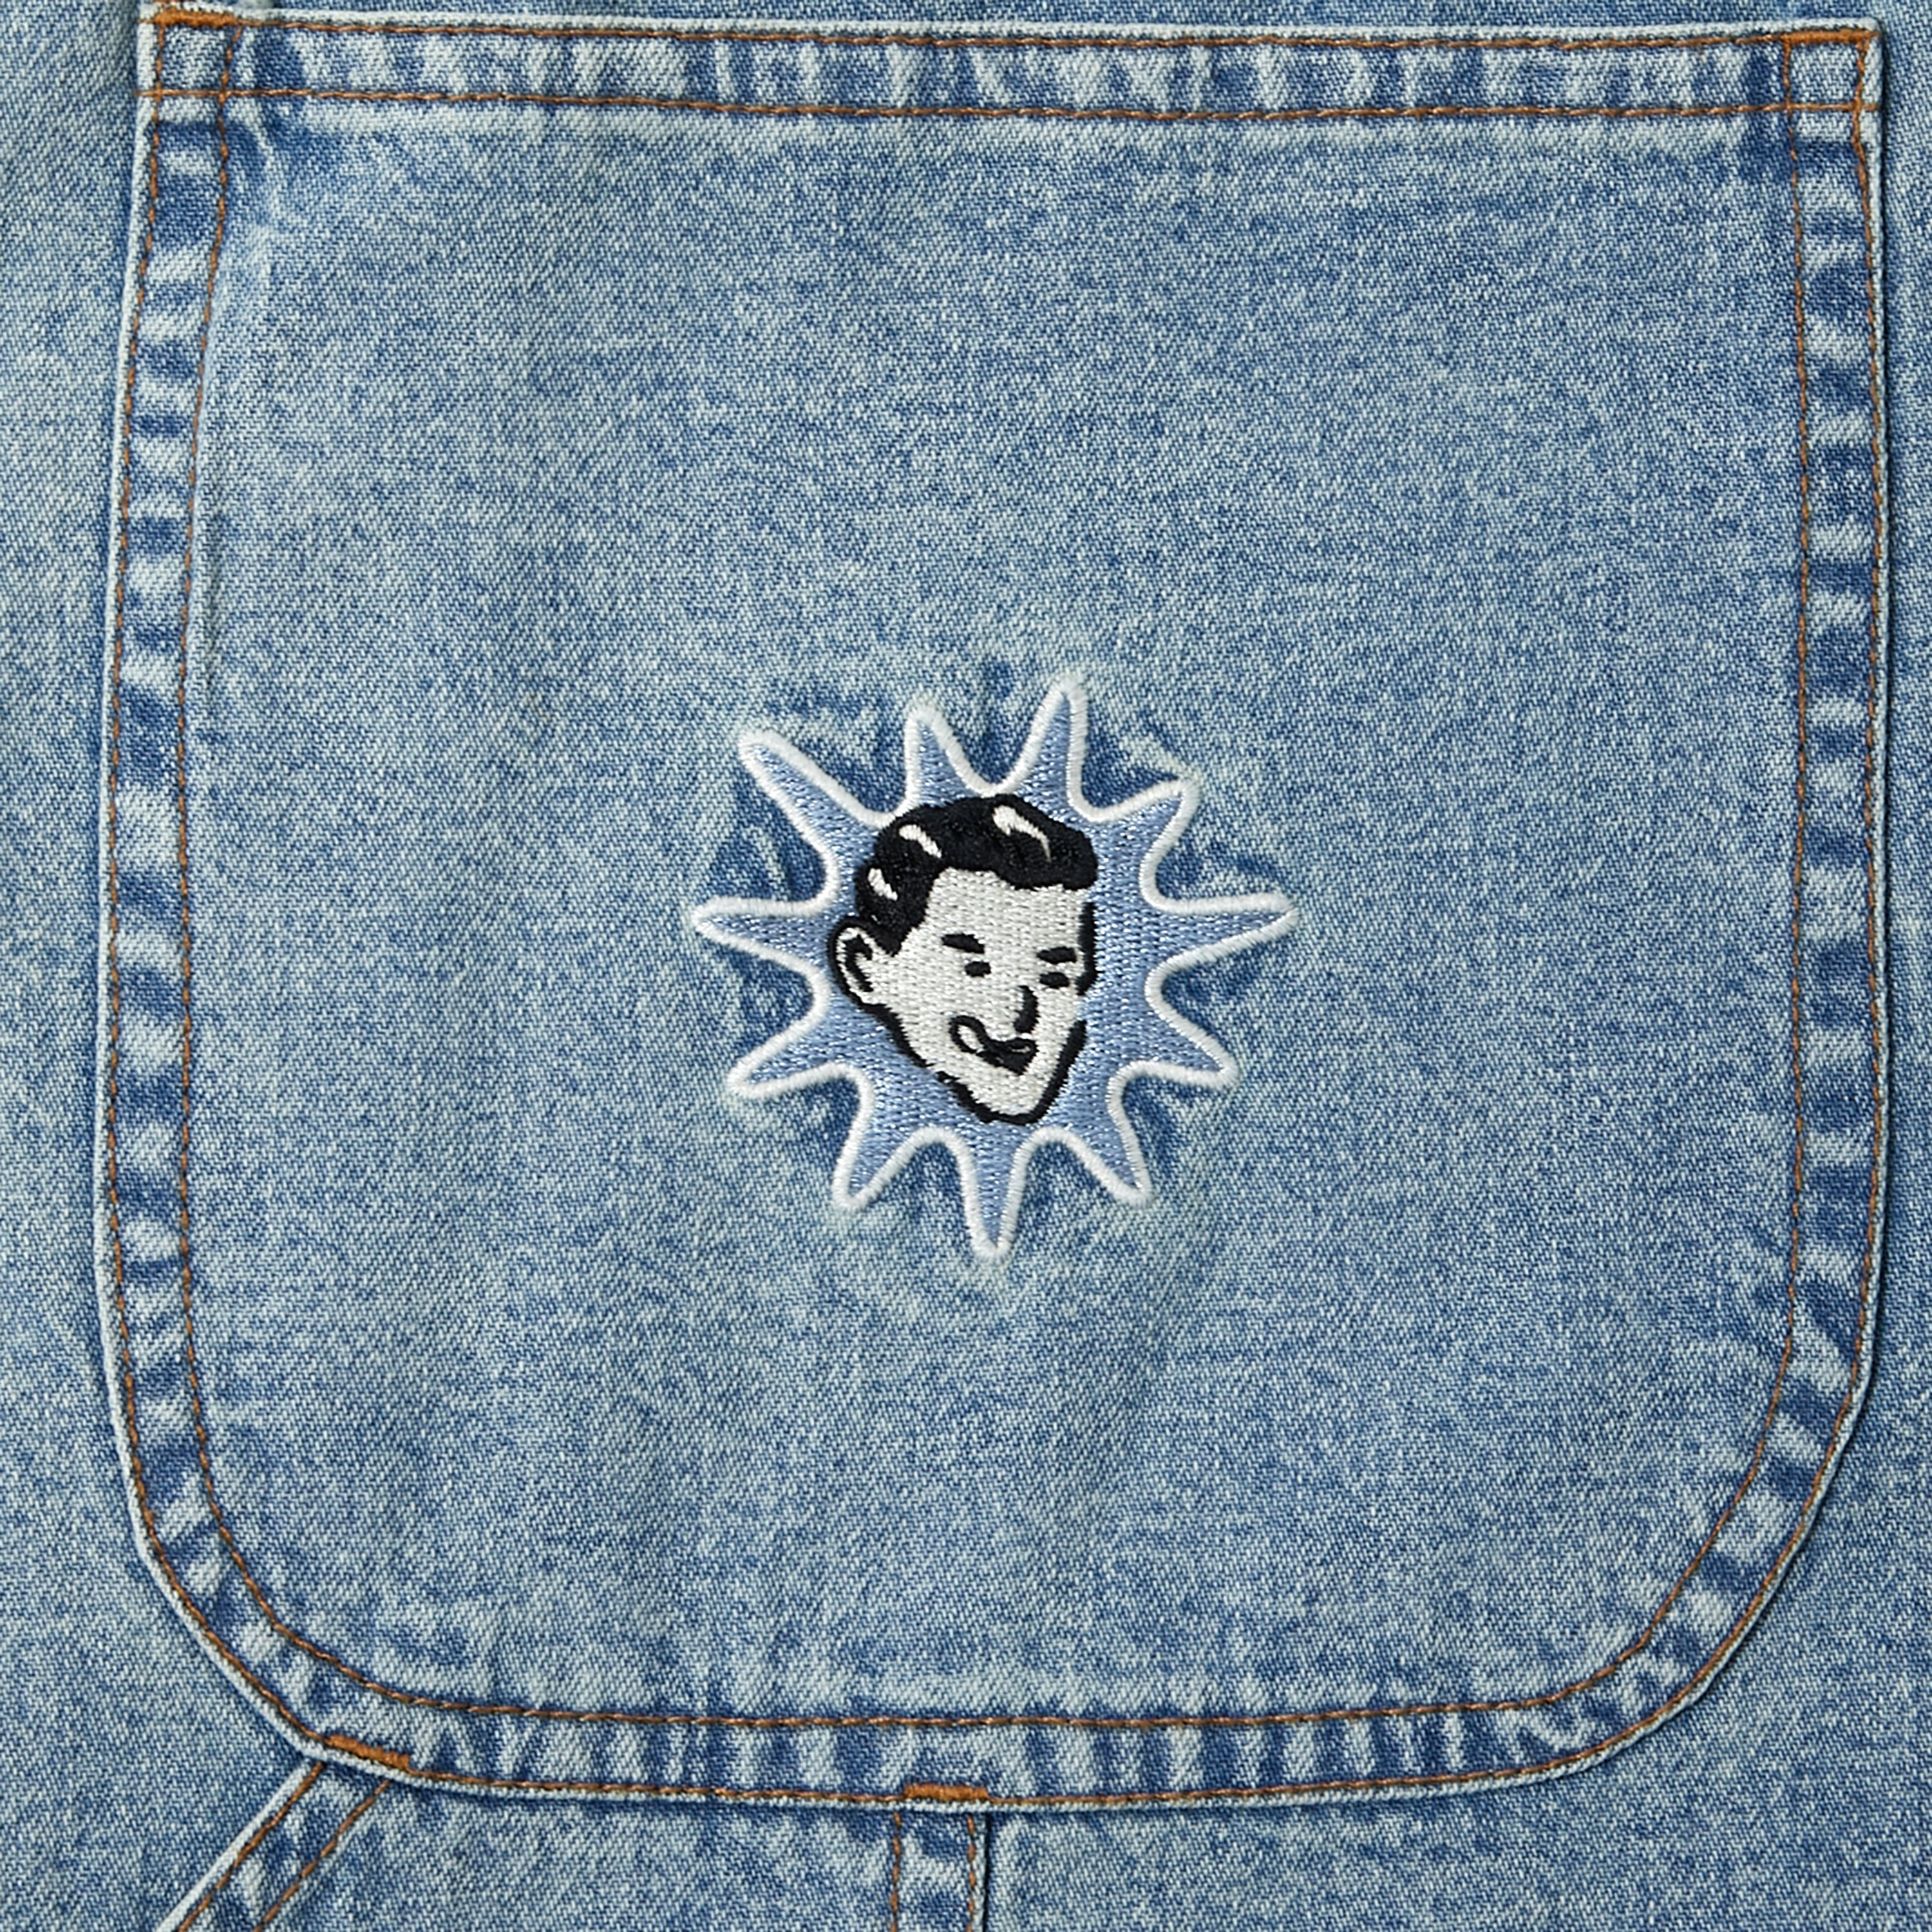 Load image into Gallery viewer, EMBOSS LOGO DENIM SHORTS
